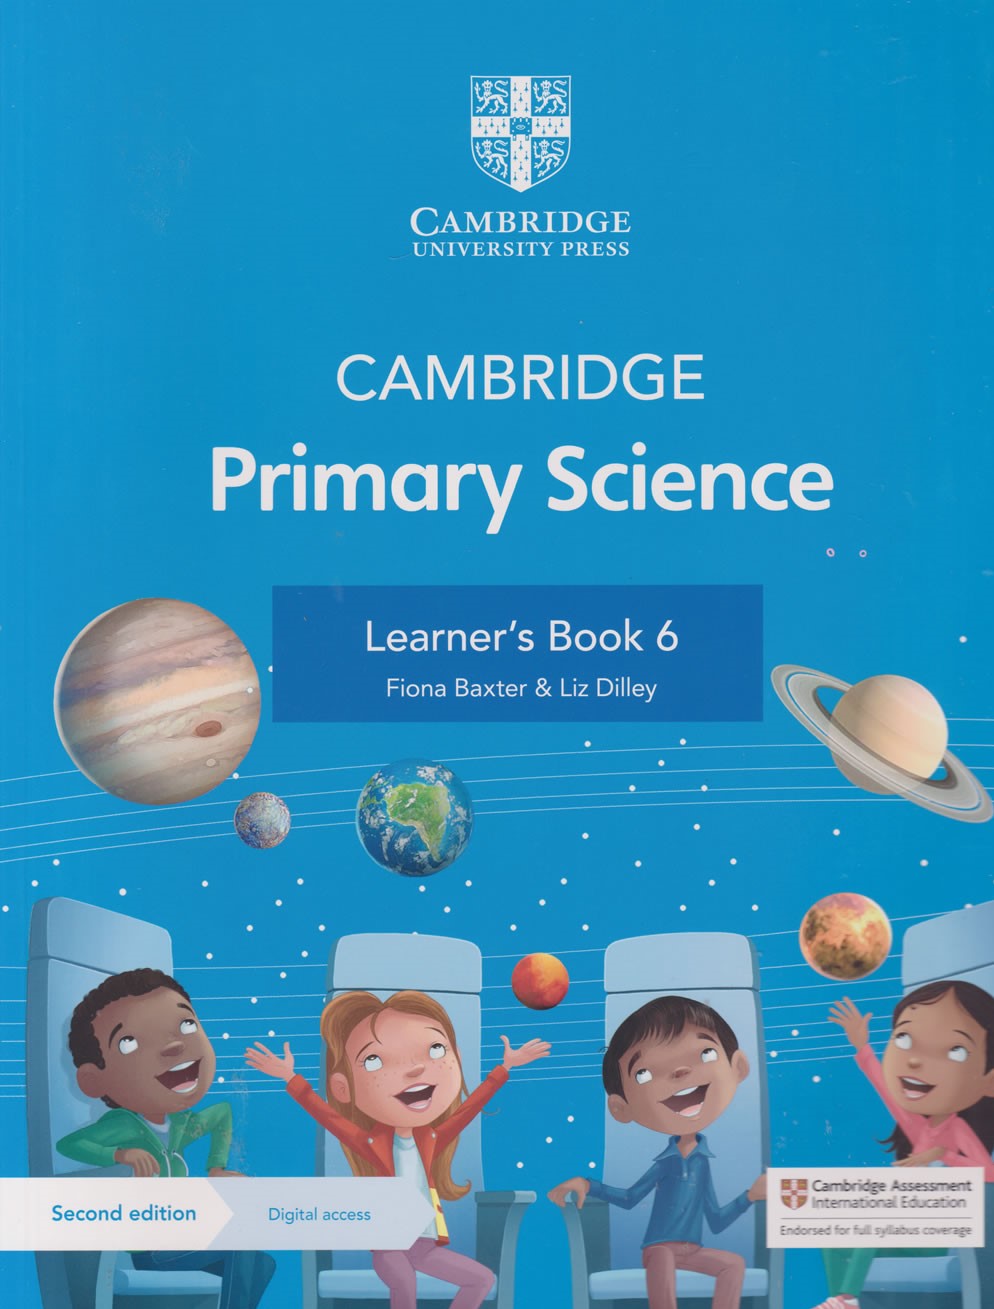 Cambridge Primary Science Learner's Book 6 with Digital Access | Best Learning Books | for Kids in Bahrain | Halabh